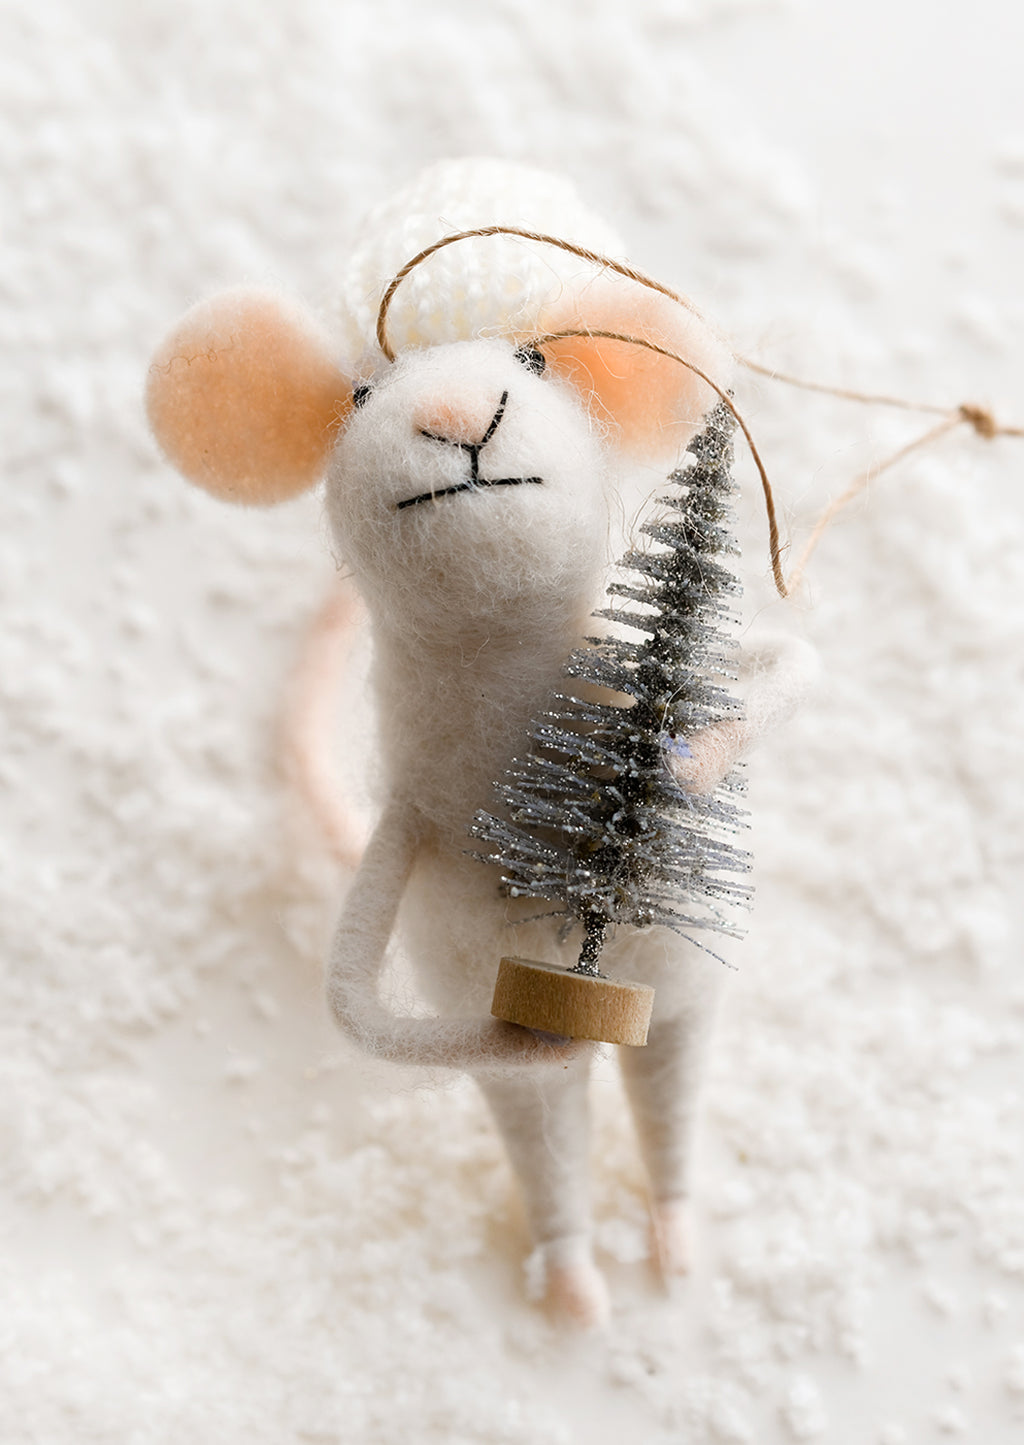 Knit Cap w/ Tree: A felted mouse ornament wearing white cap and holding silver tree.